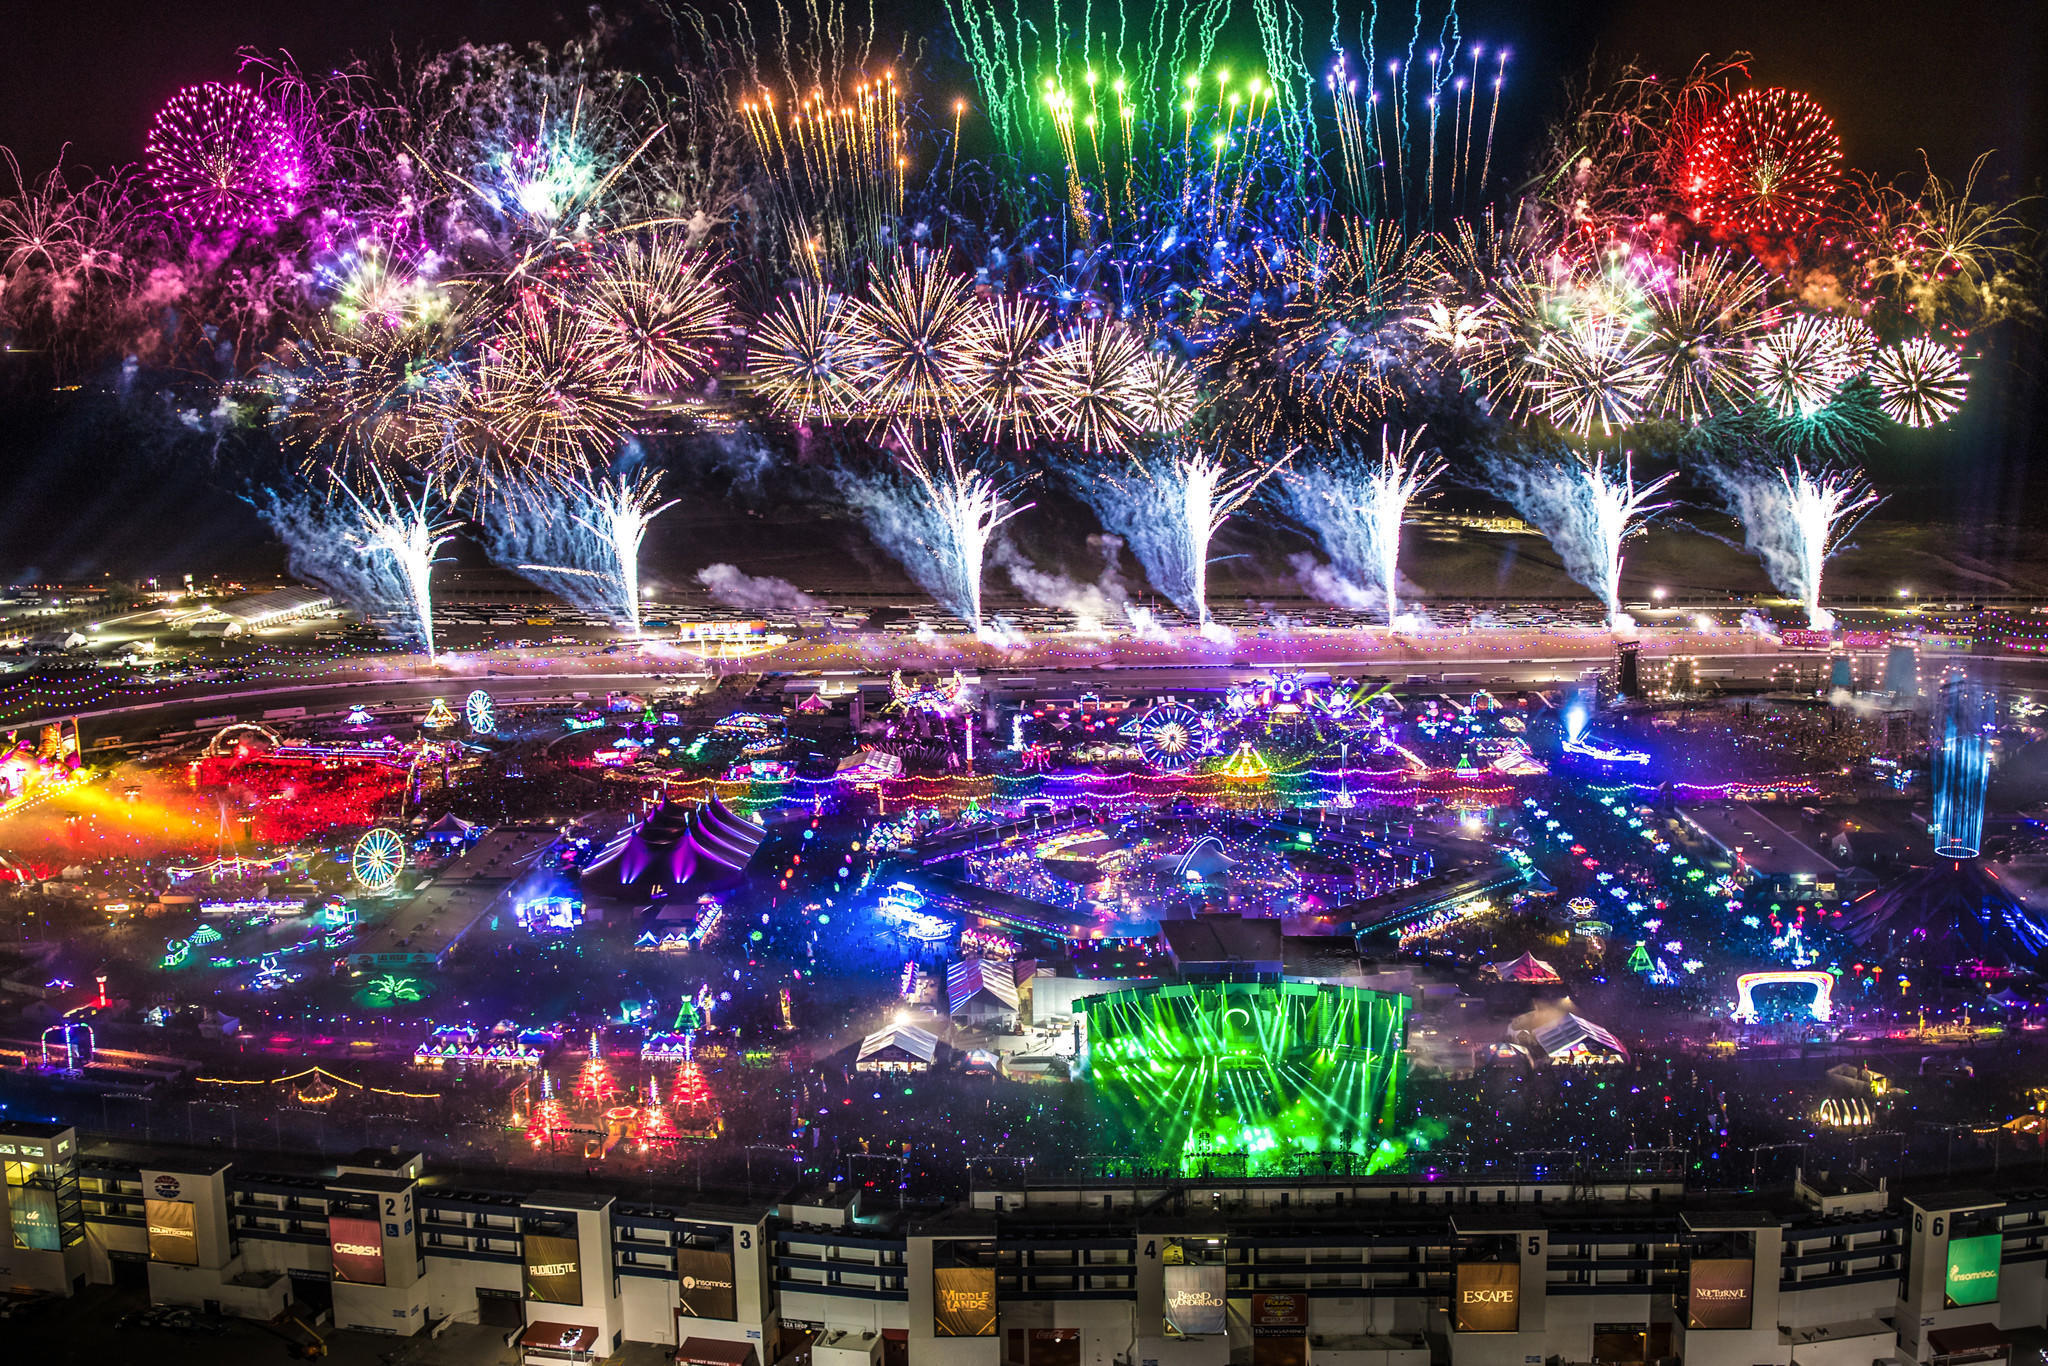 EDC Las Vegas moves to May in 2018, adds camping - LA Times